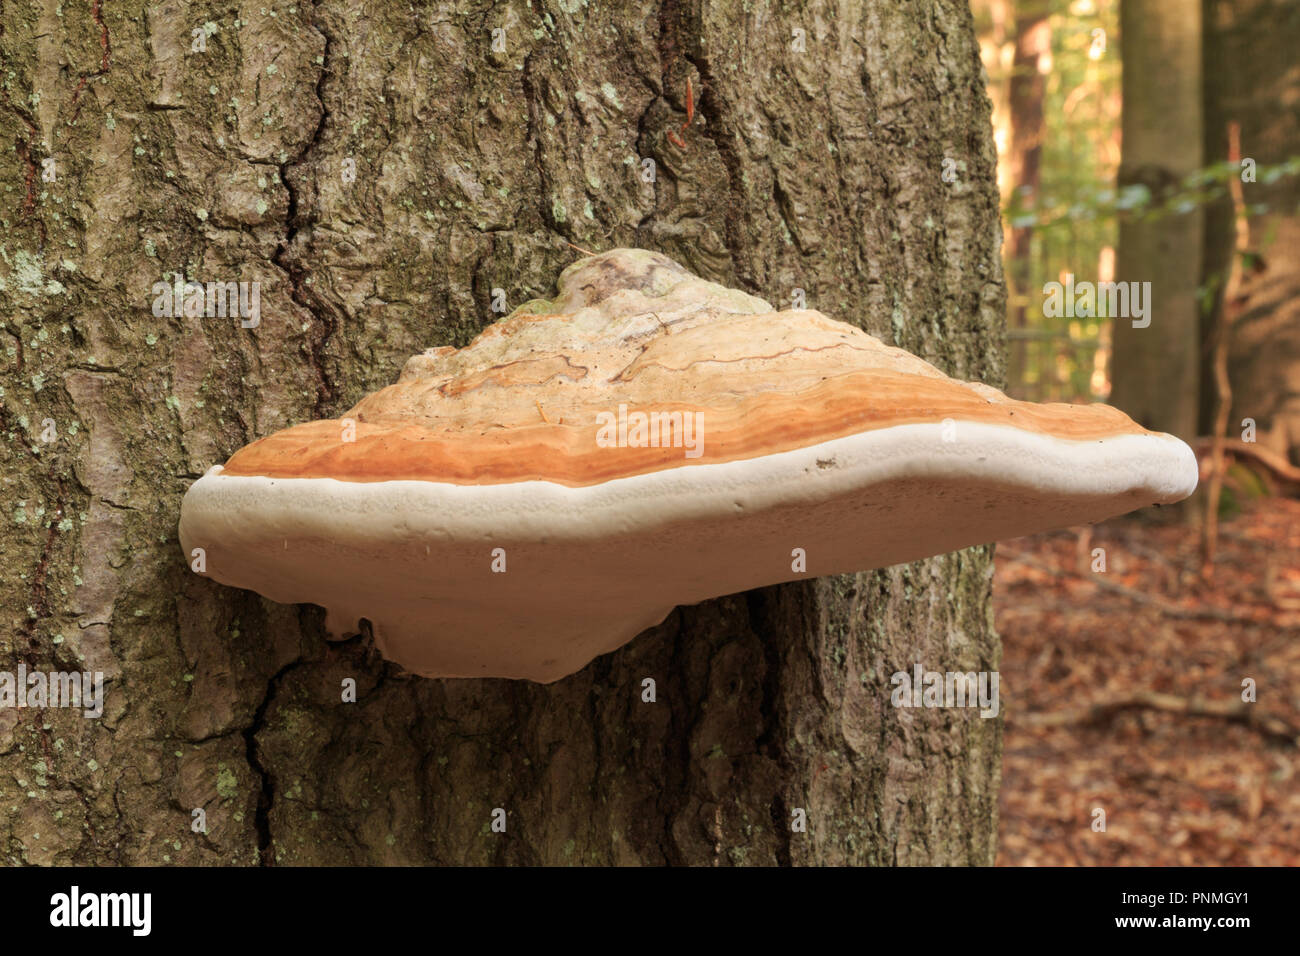 Mushroom gray fire sponge grows on a tree. The top is brown and the bottom of the mushroom is white. Stock Photo